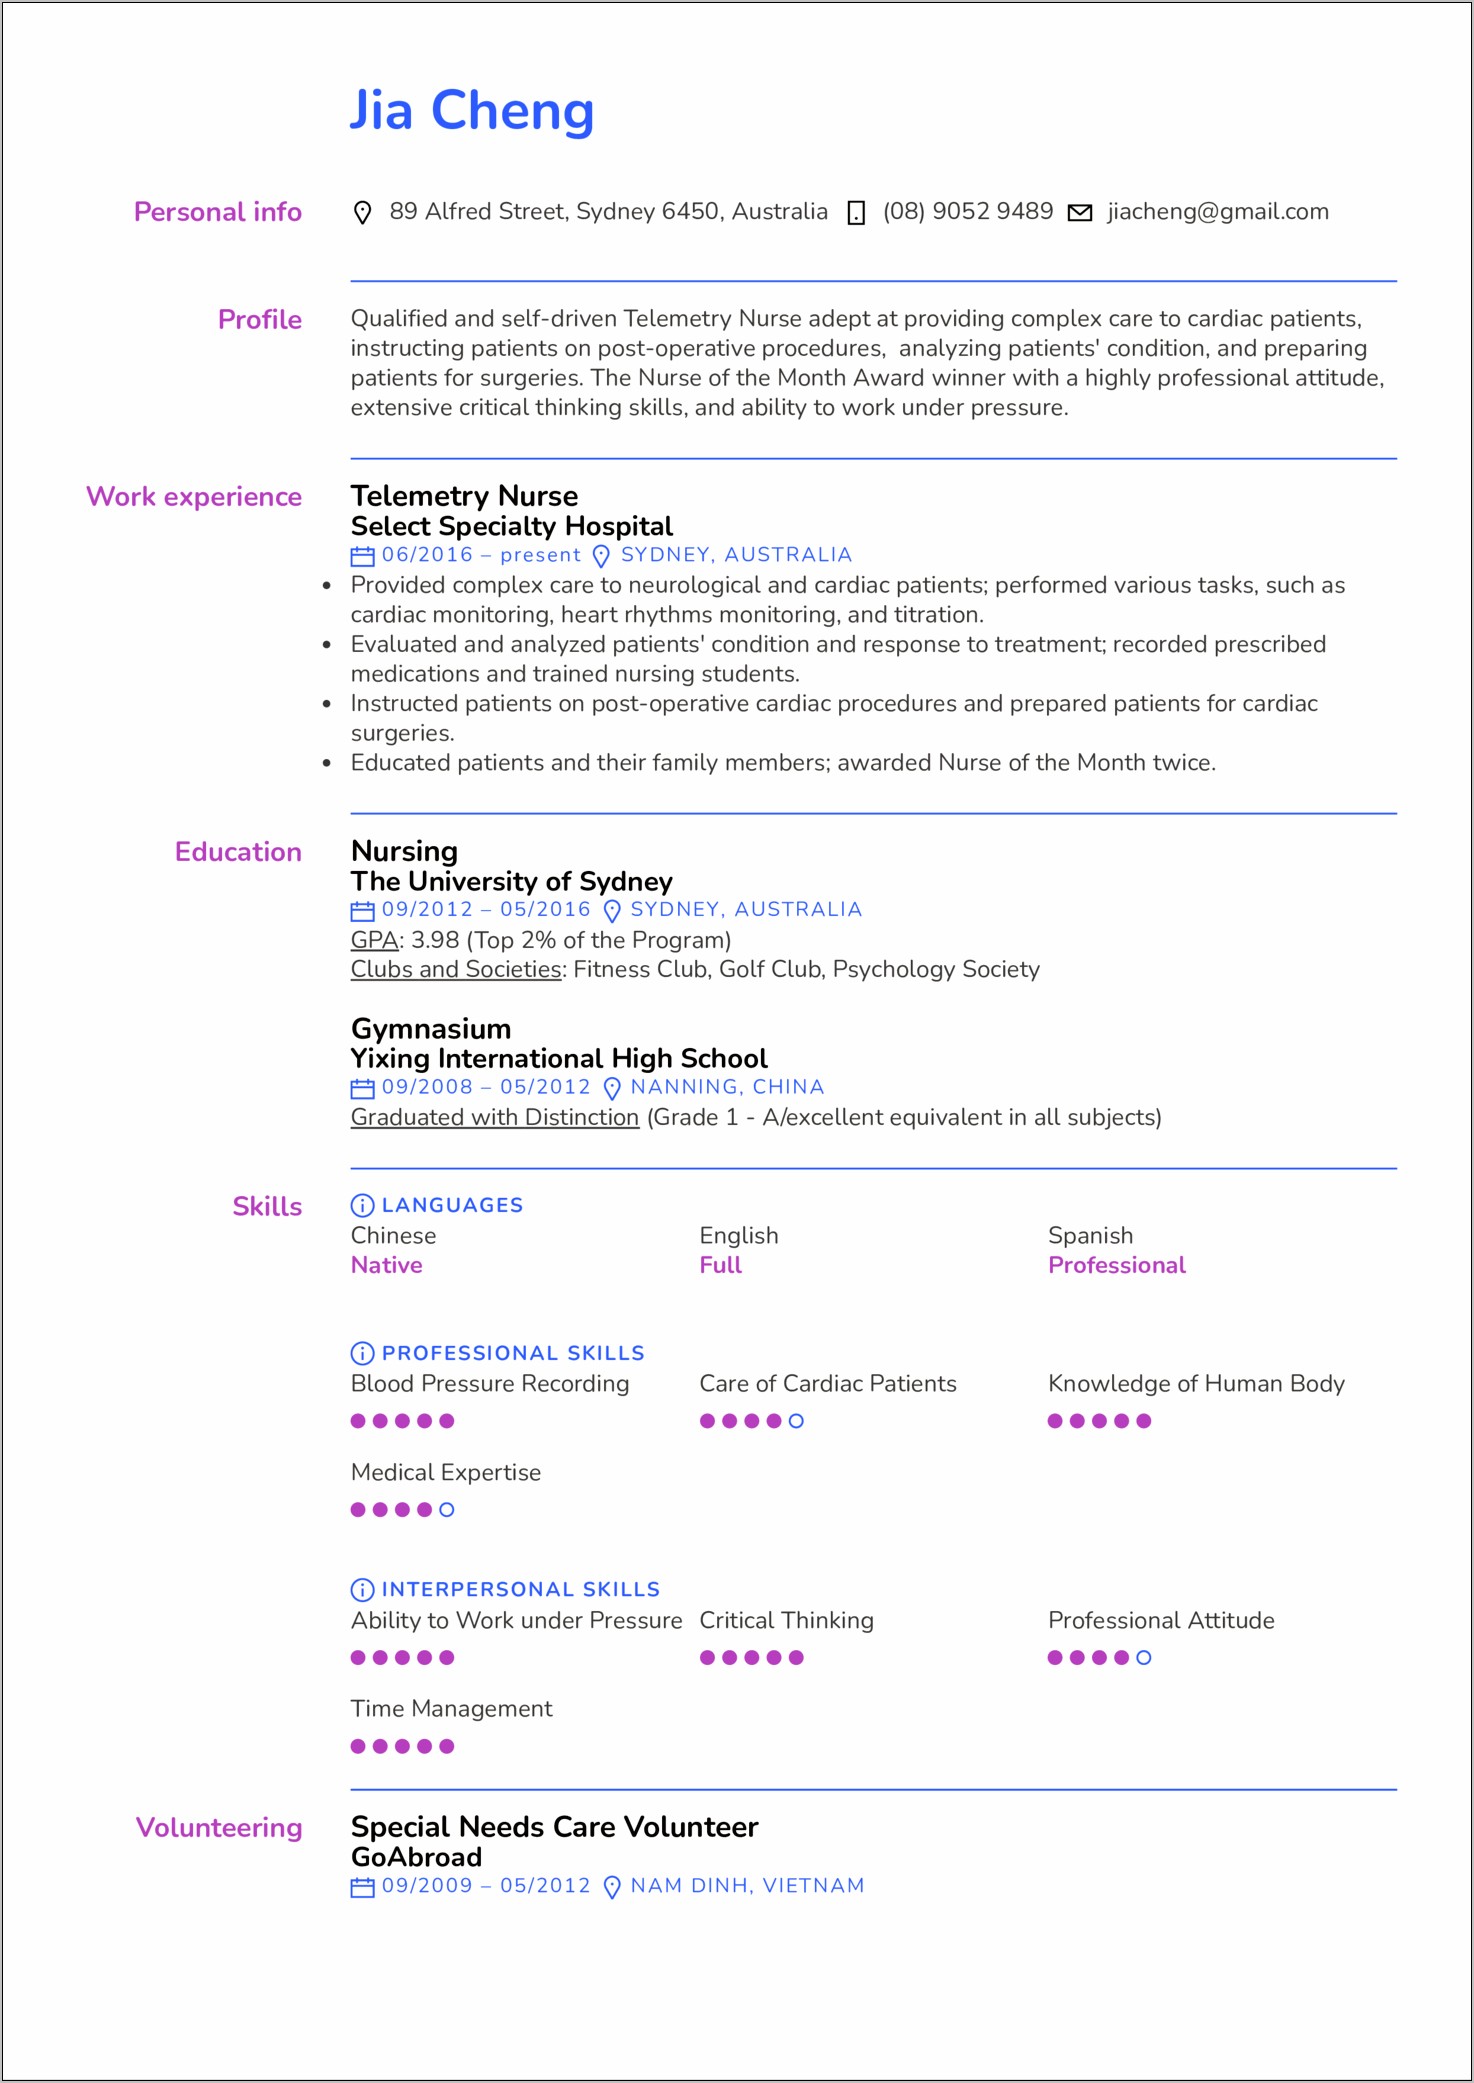 Medical Surgical Nurse Resume Example